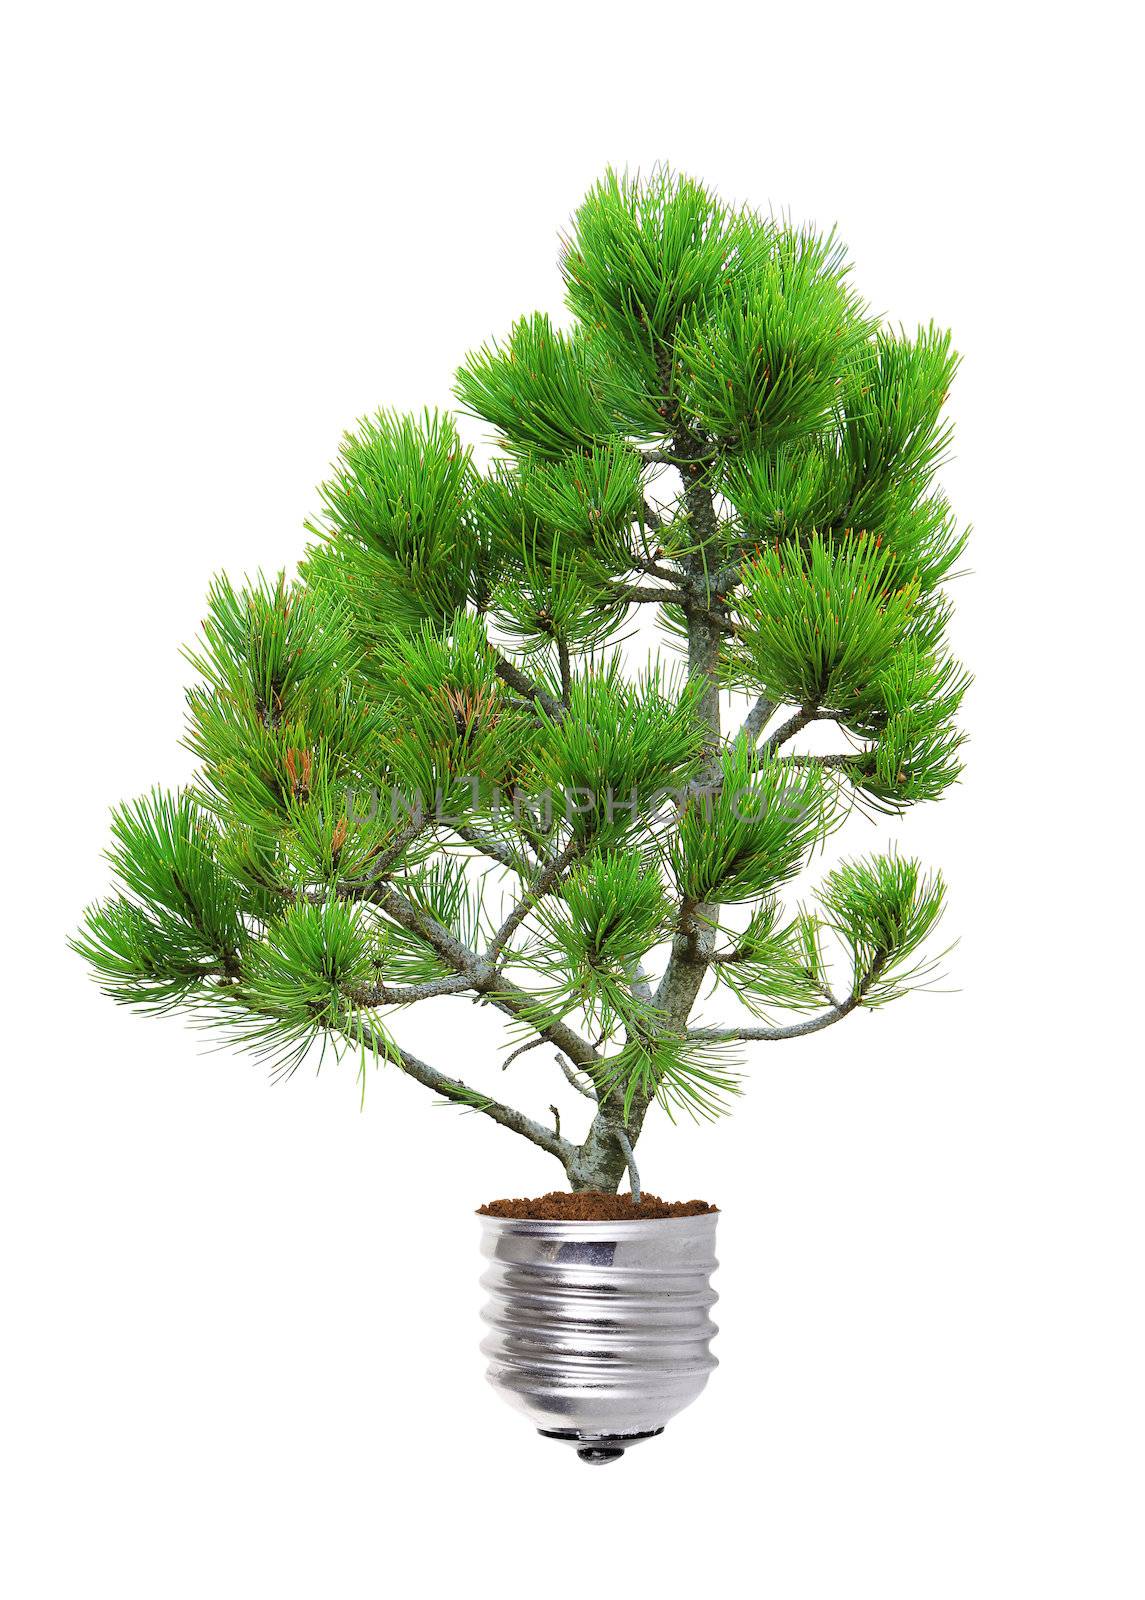 pine growing from the base of the light bulb isolated over white
